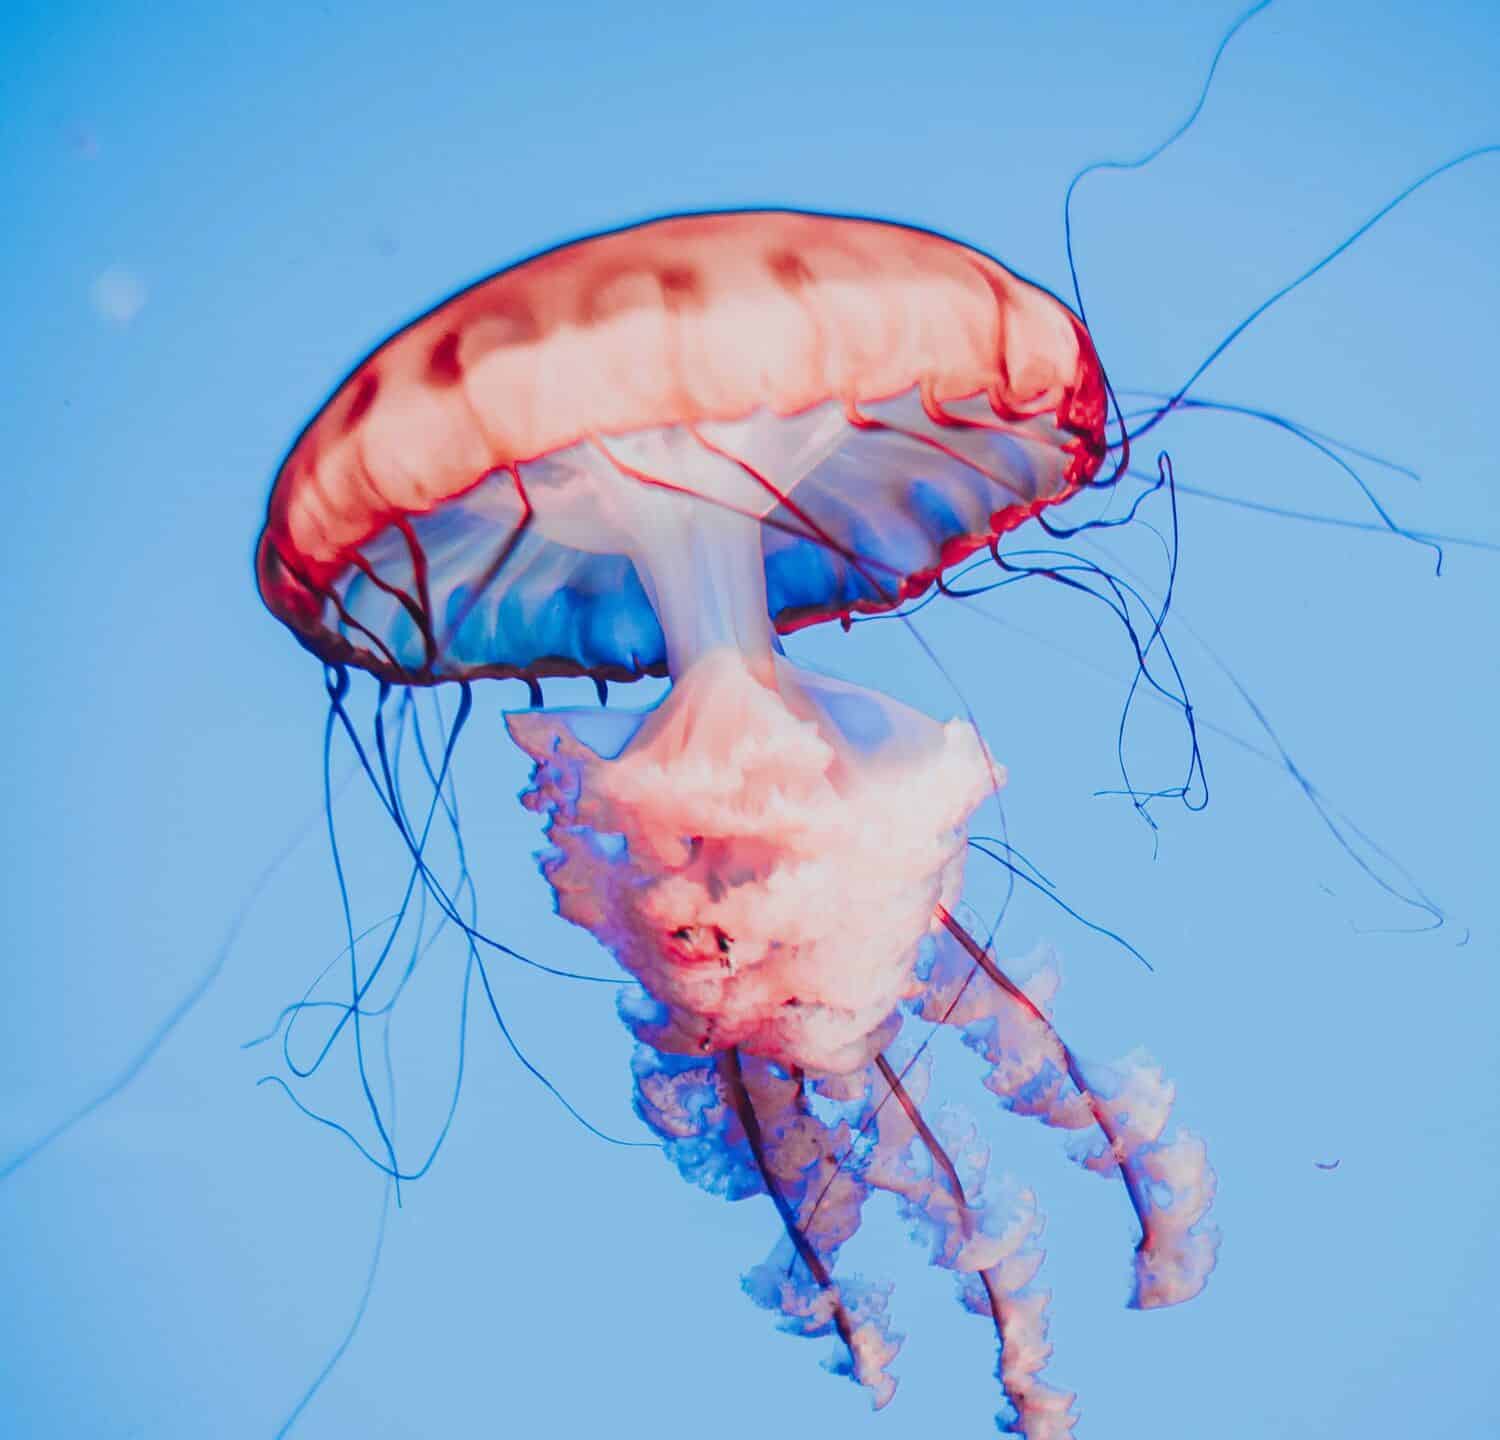 Small jellyfish floating in the ocean with its tentacles spread out.